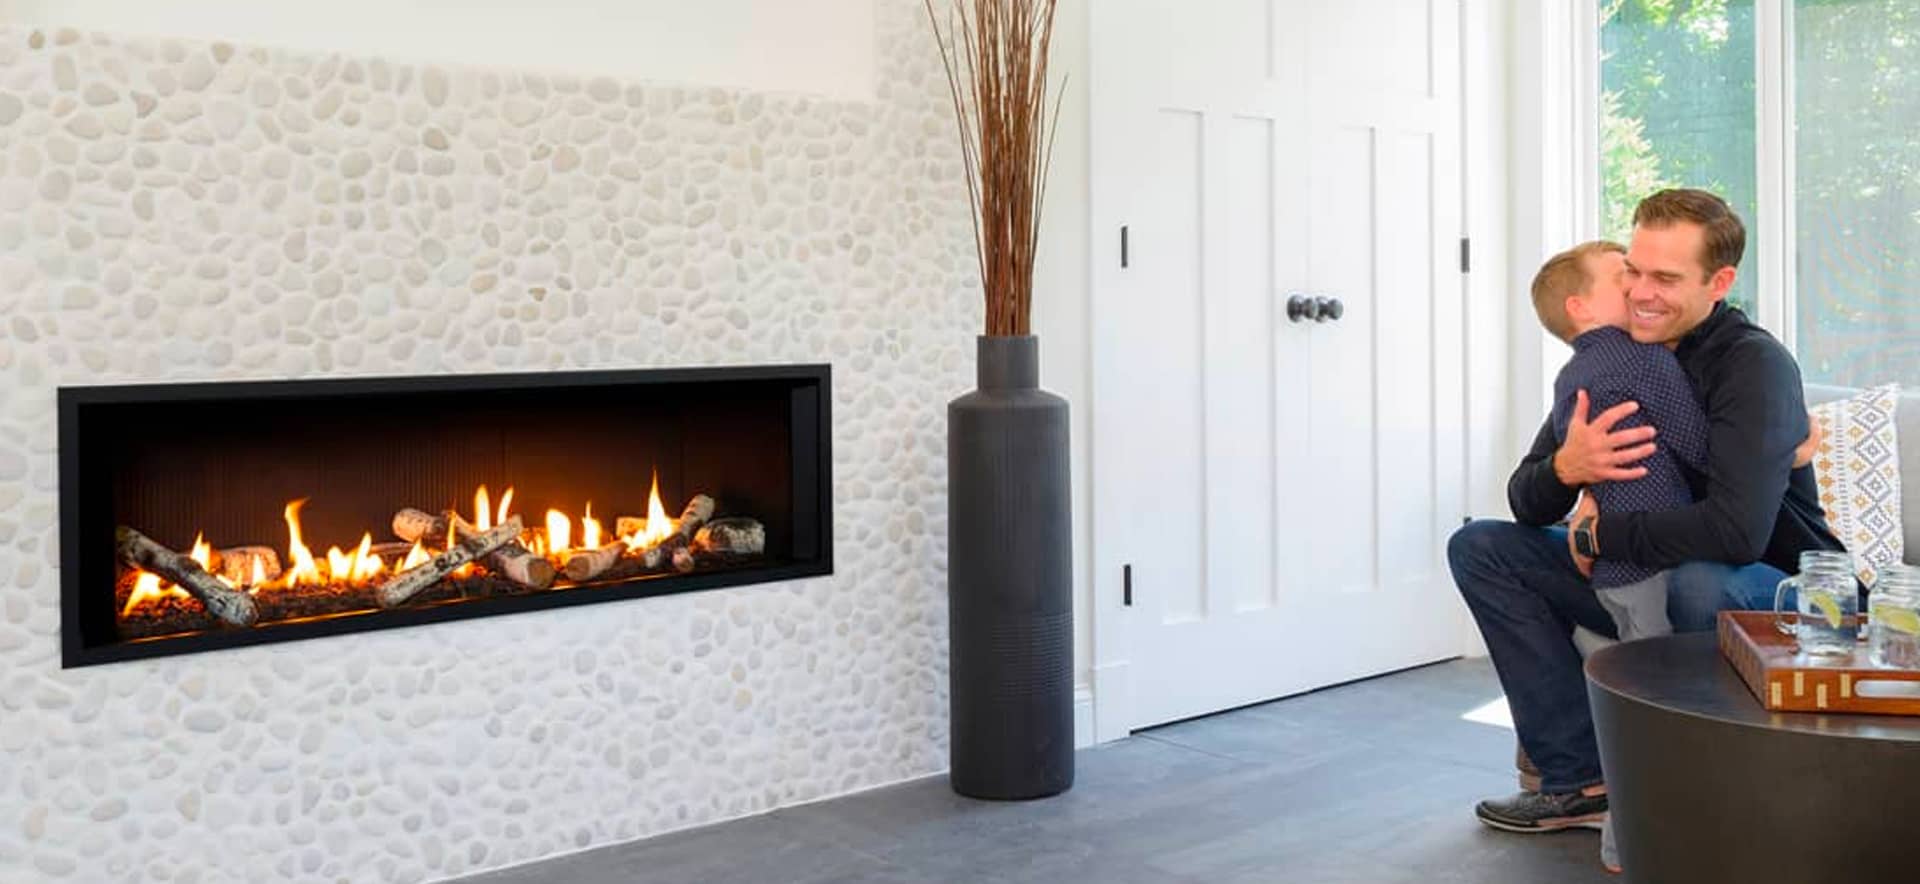 About Valor Fireplaces